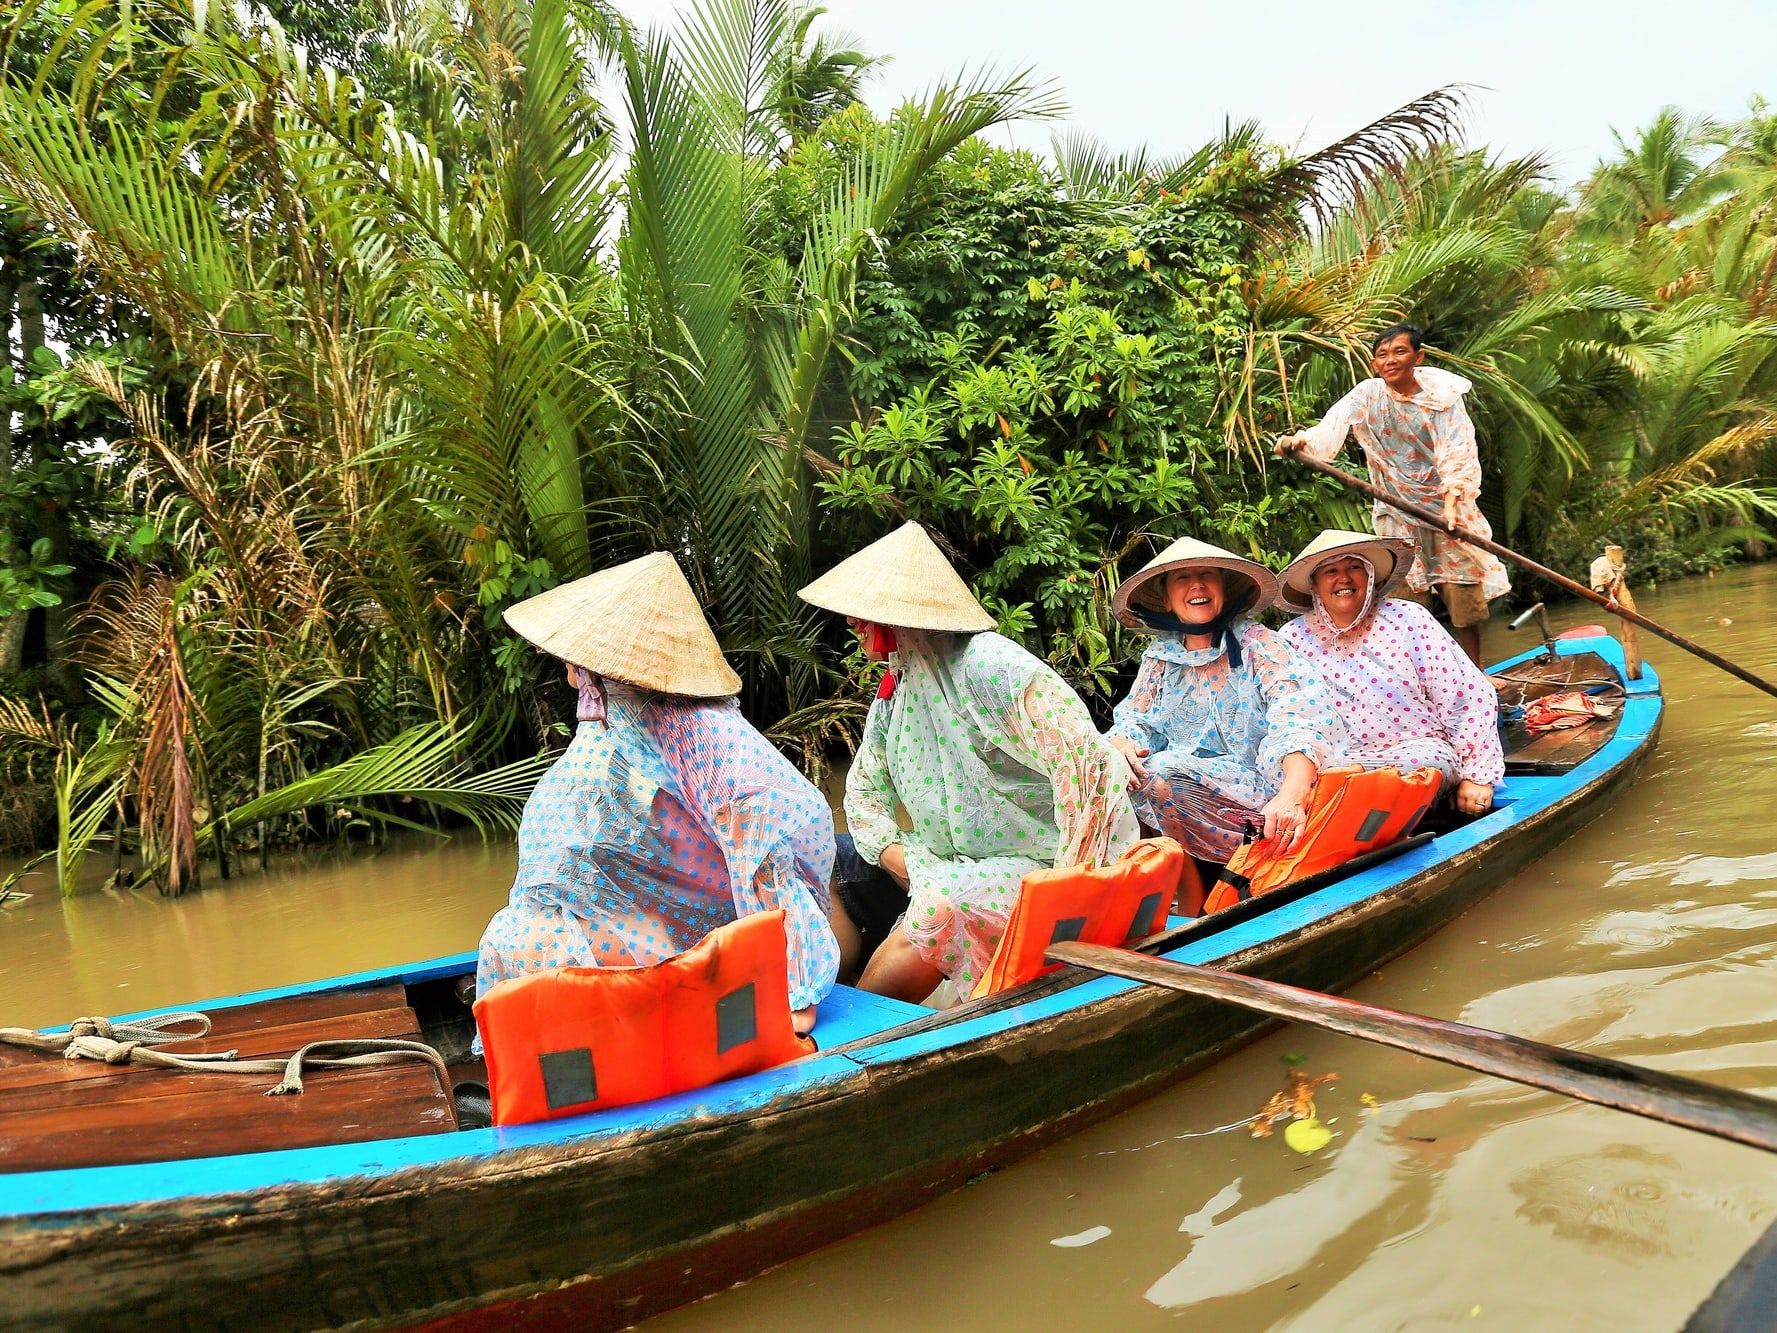 MEKONG DELTA DISCOVERY (Mỹ Tho - Bến Tre)